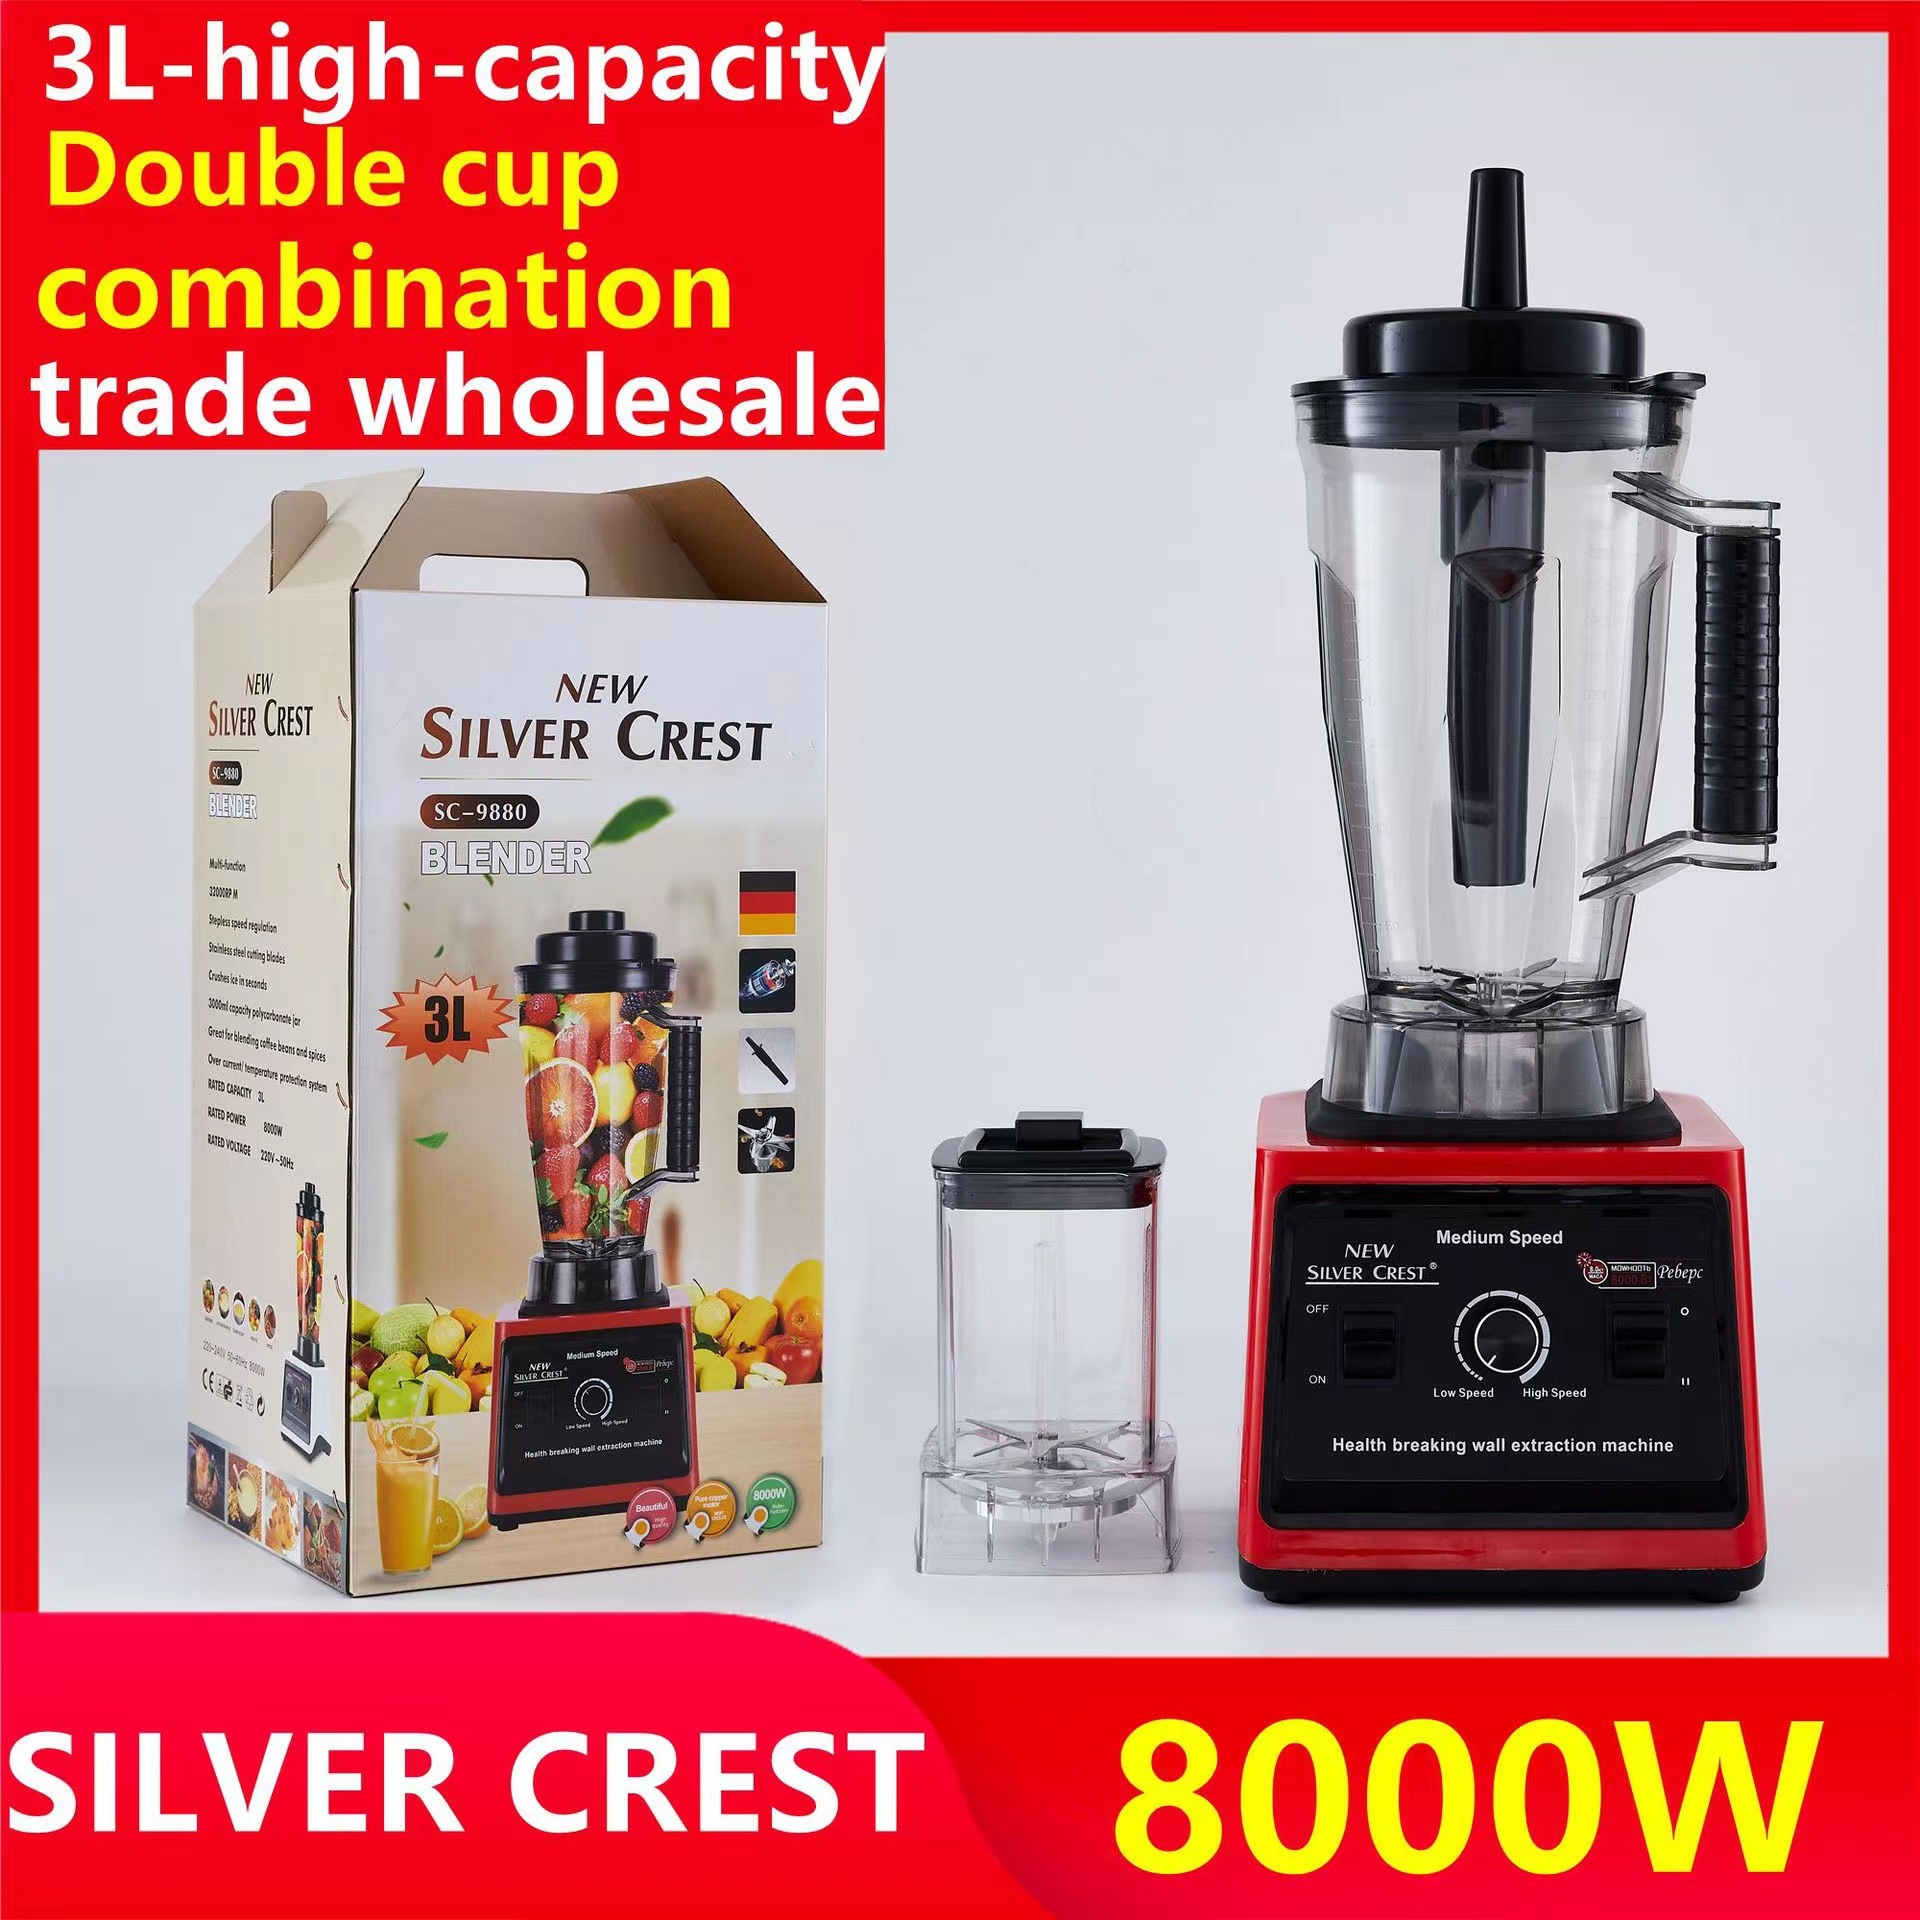 Double Cup Large Capacity 8000W-SILVERCR...